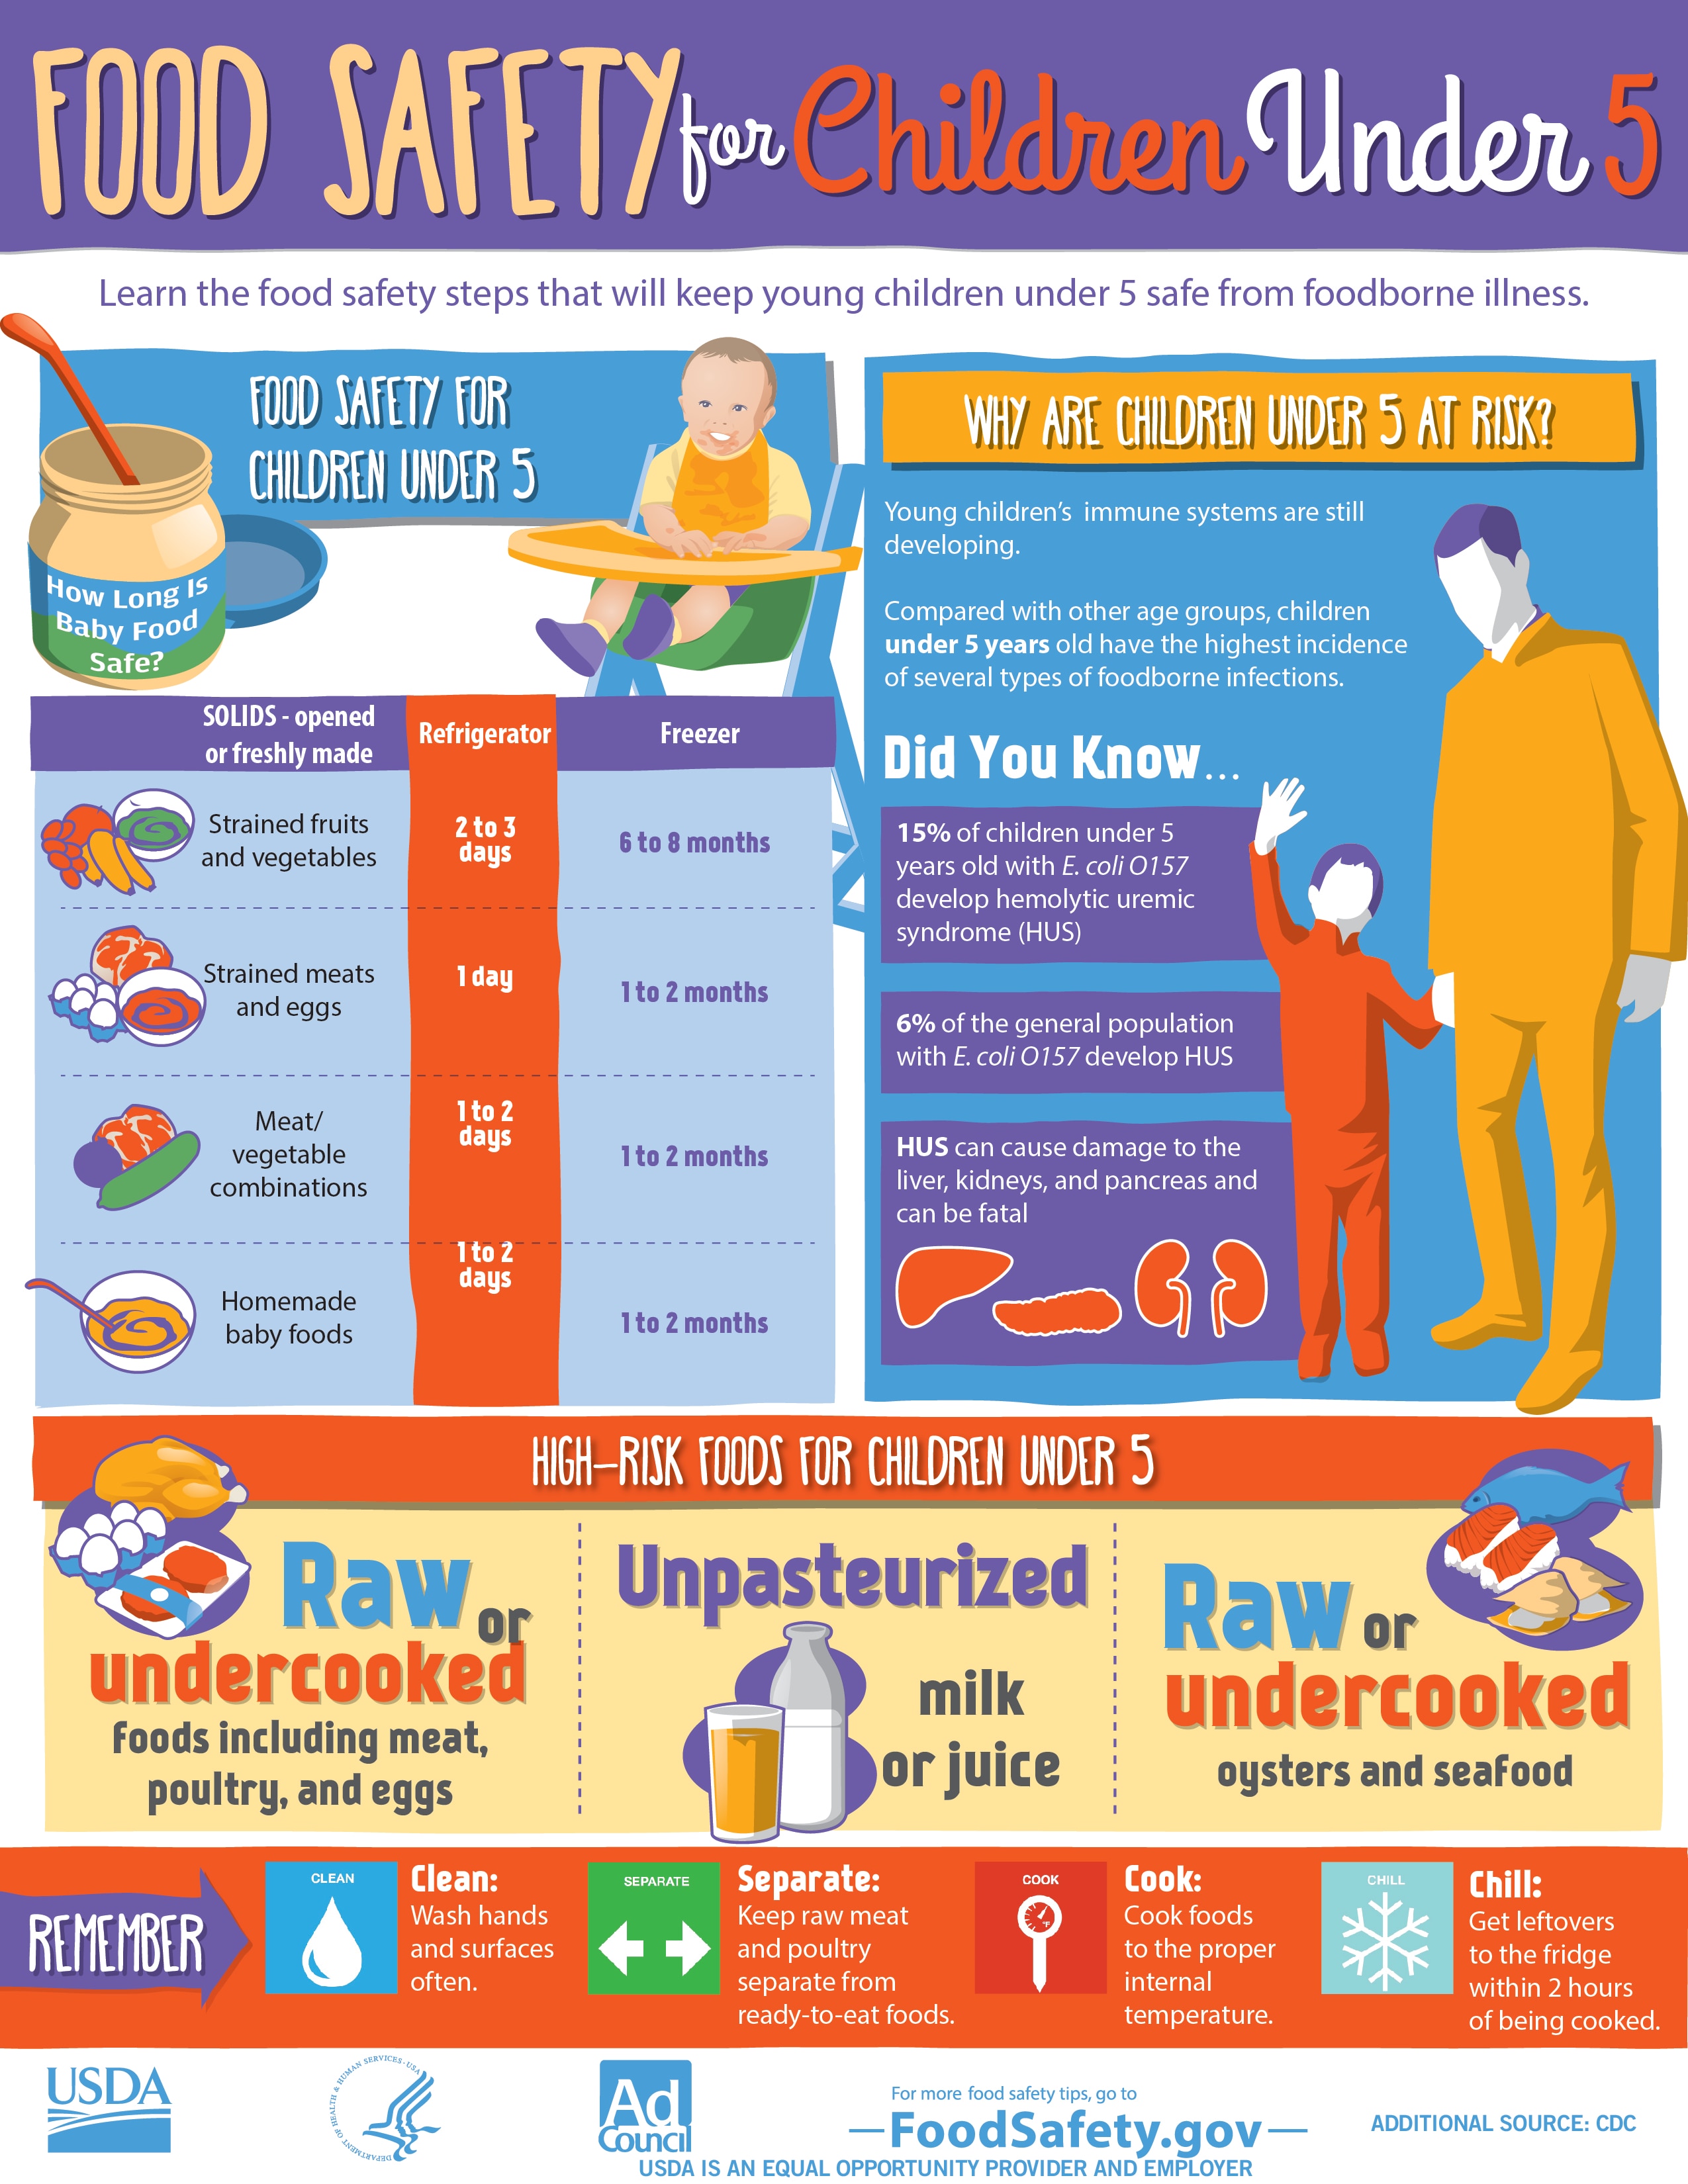 Infographic from FoodSafety.gov with food safety steps that will protect children under 5 from foodborne illness.